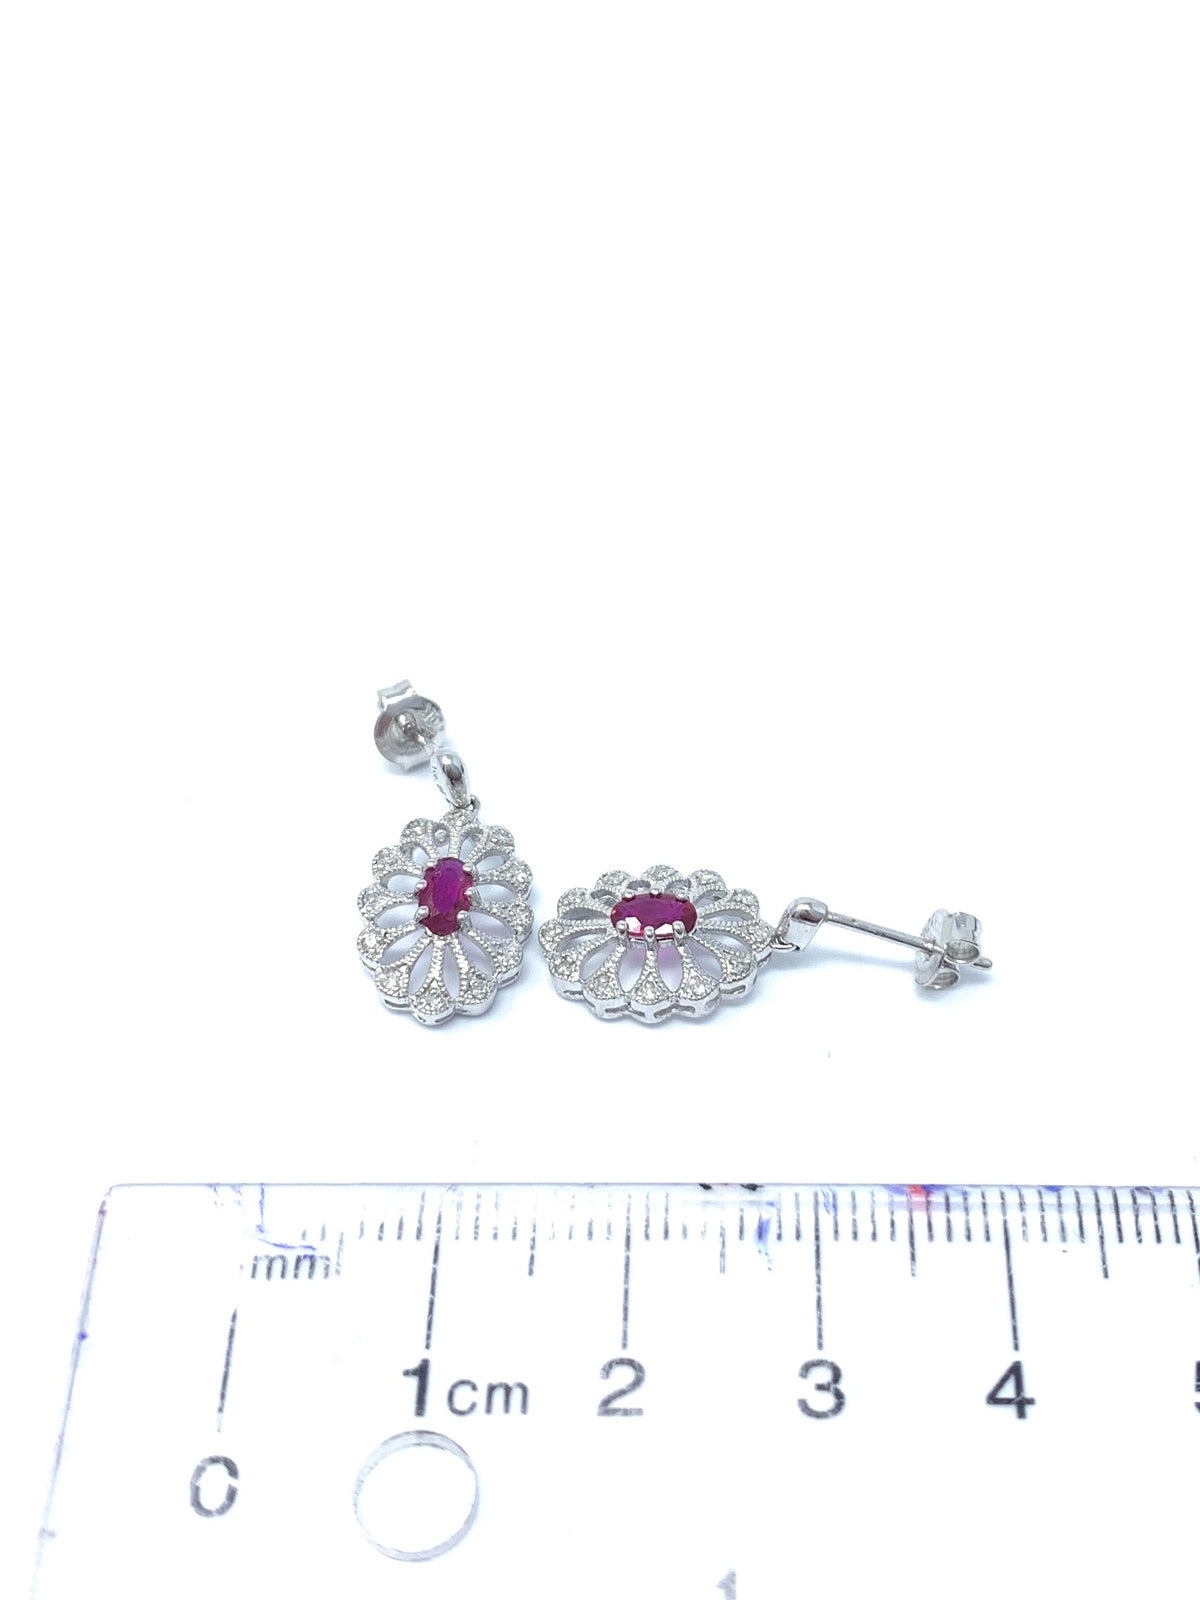 10K White Gold 0.65cttw Genuine Ruby and 0.10cttw Diamond Earrings